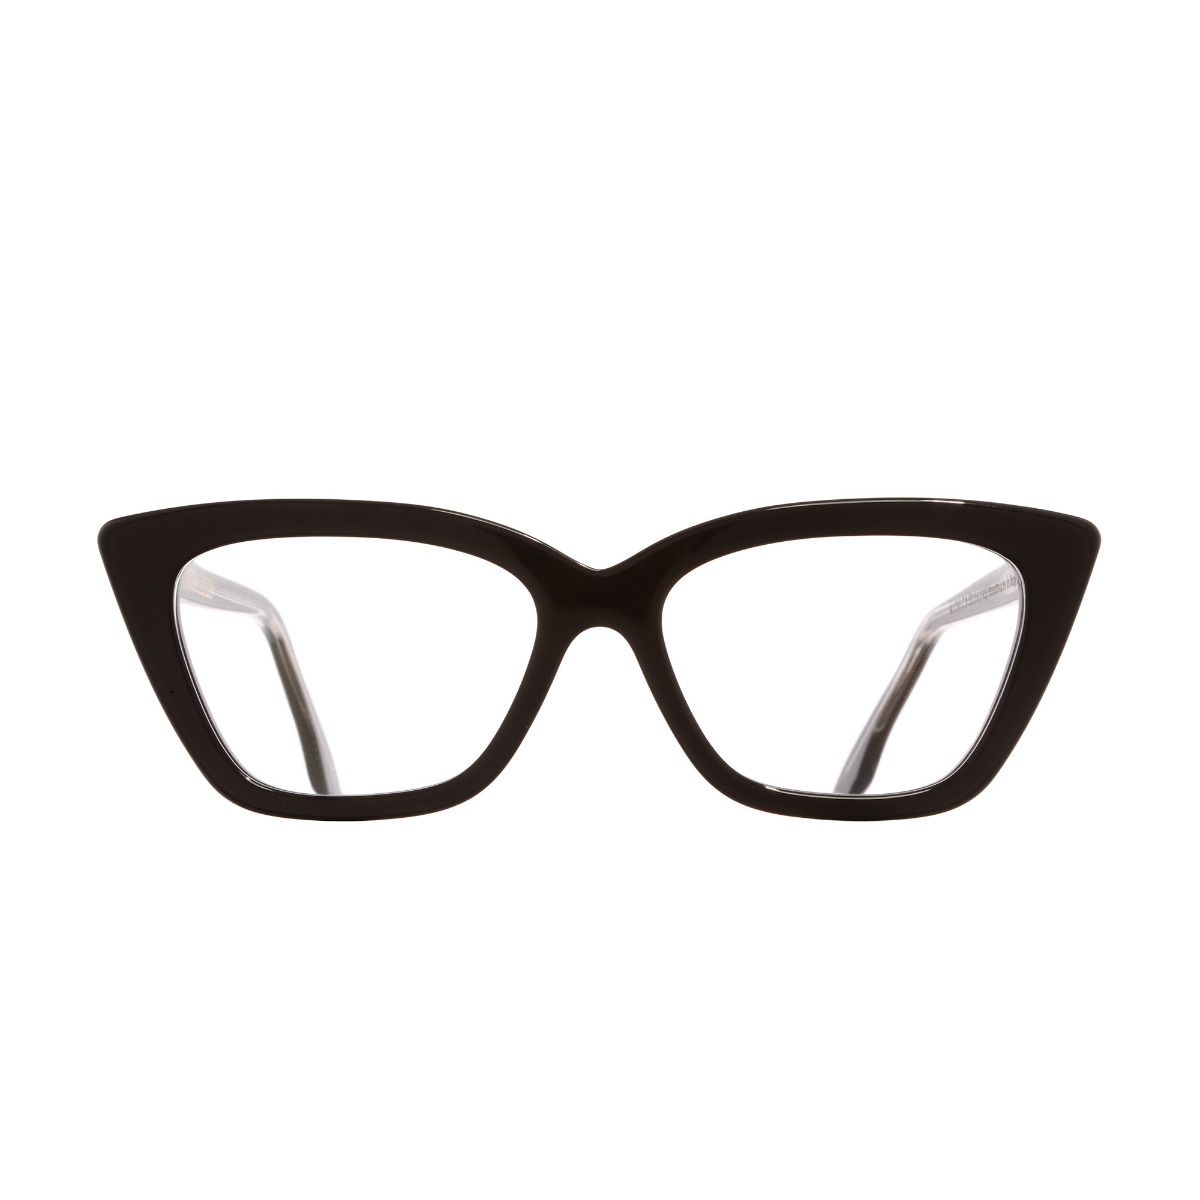 1241 Optical Cat-Eye Glasses - Black by Cutler and Gross